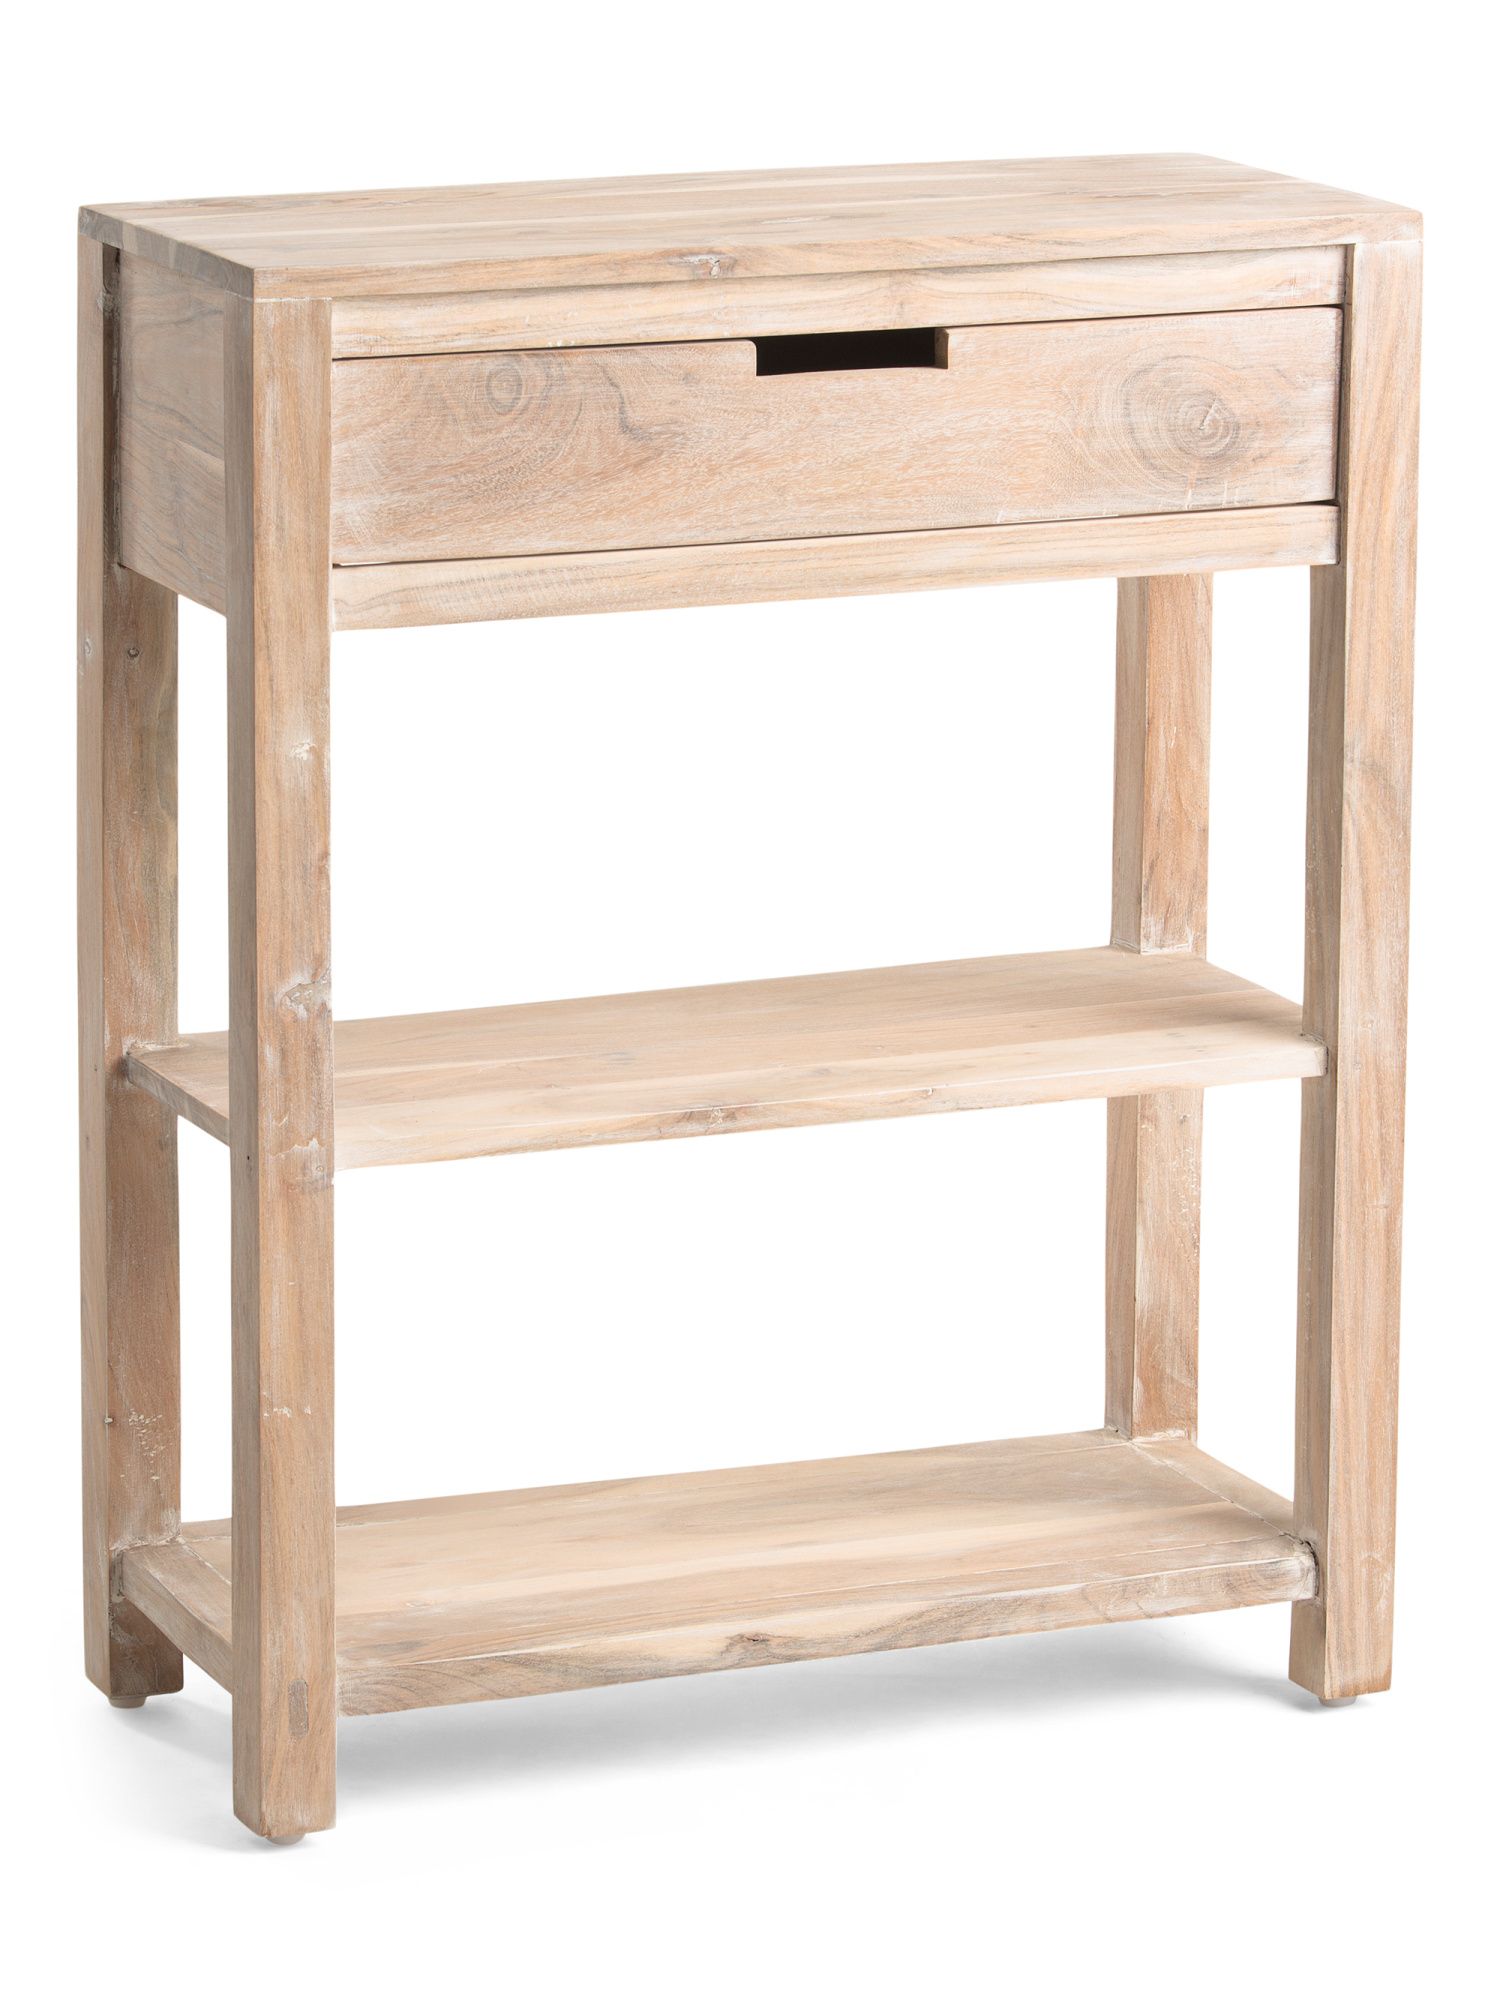 Solid Acacia Accent Table With Shelves | TJ Maxx